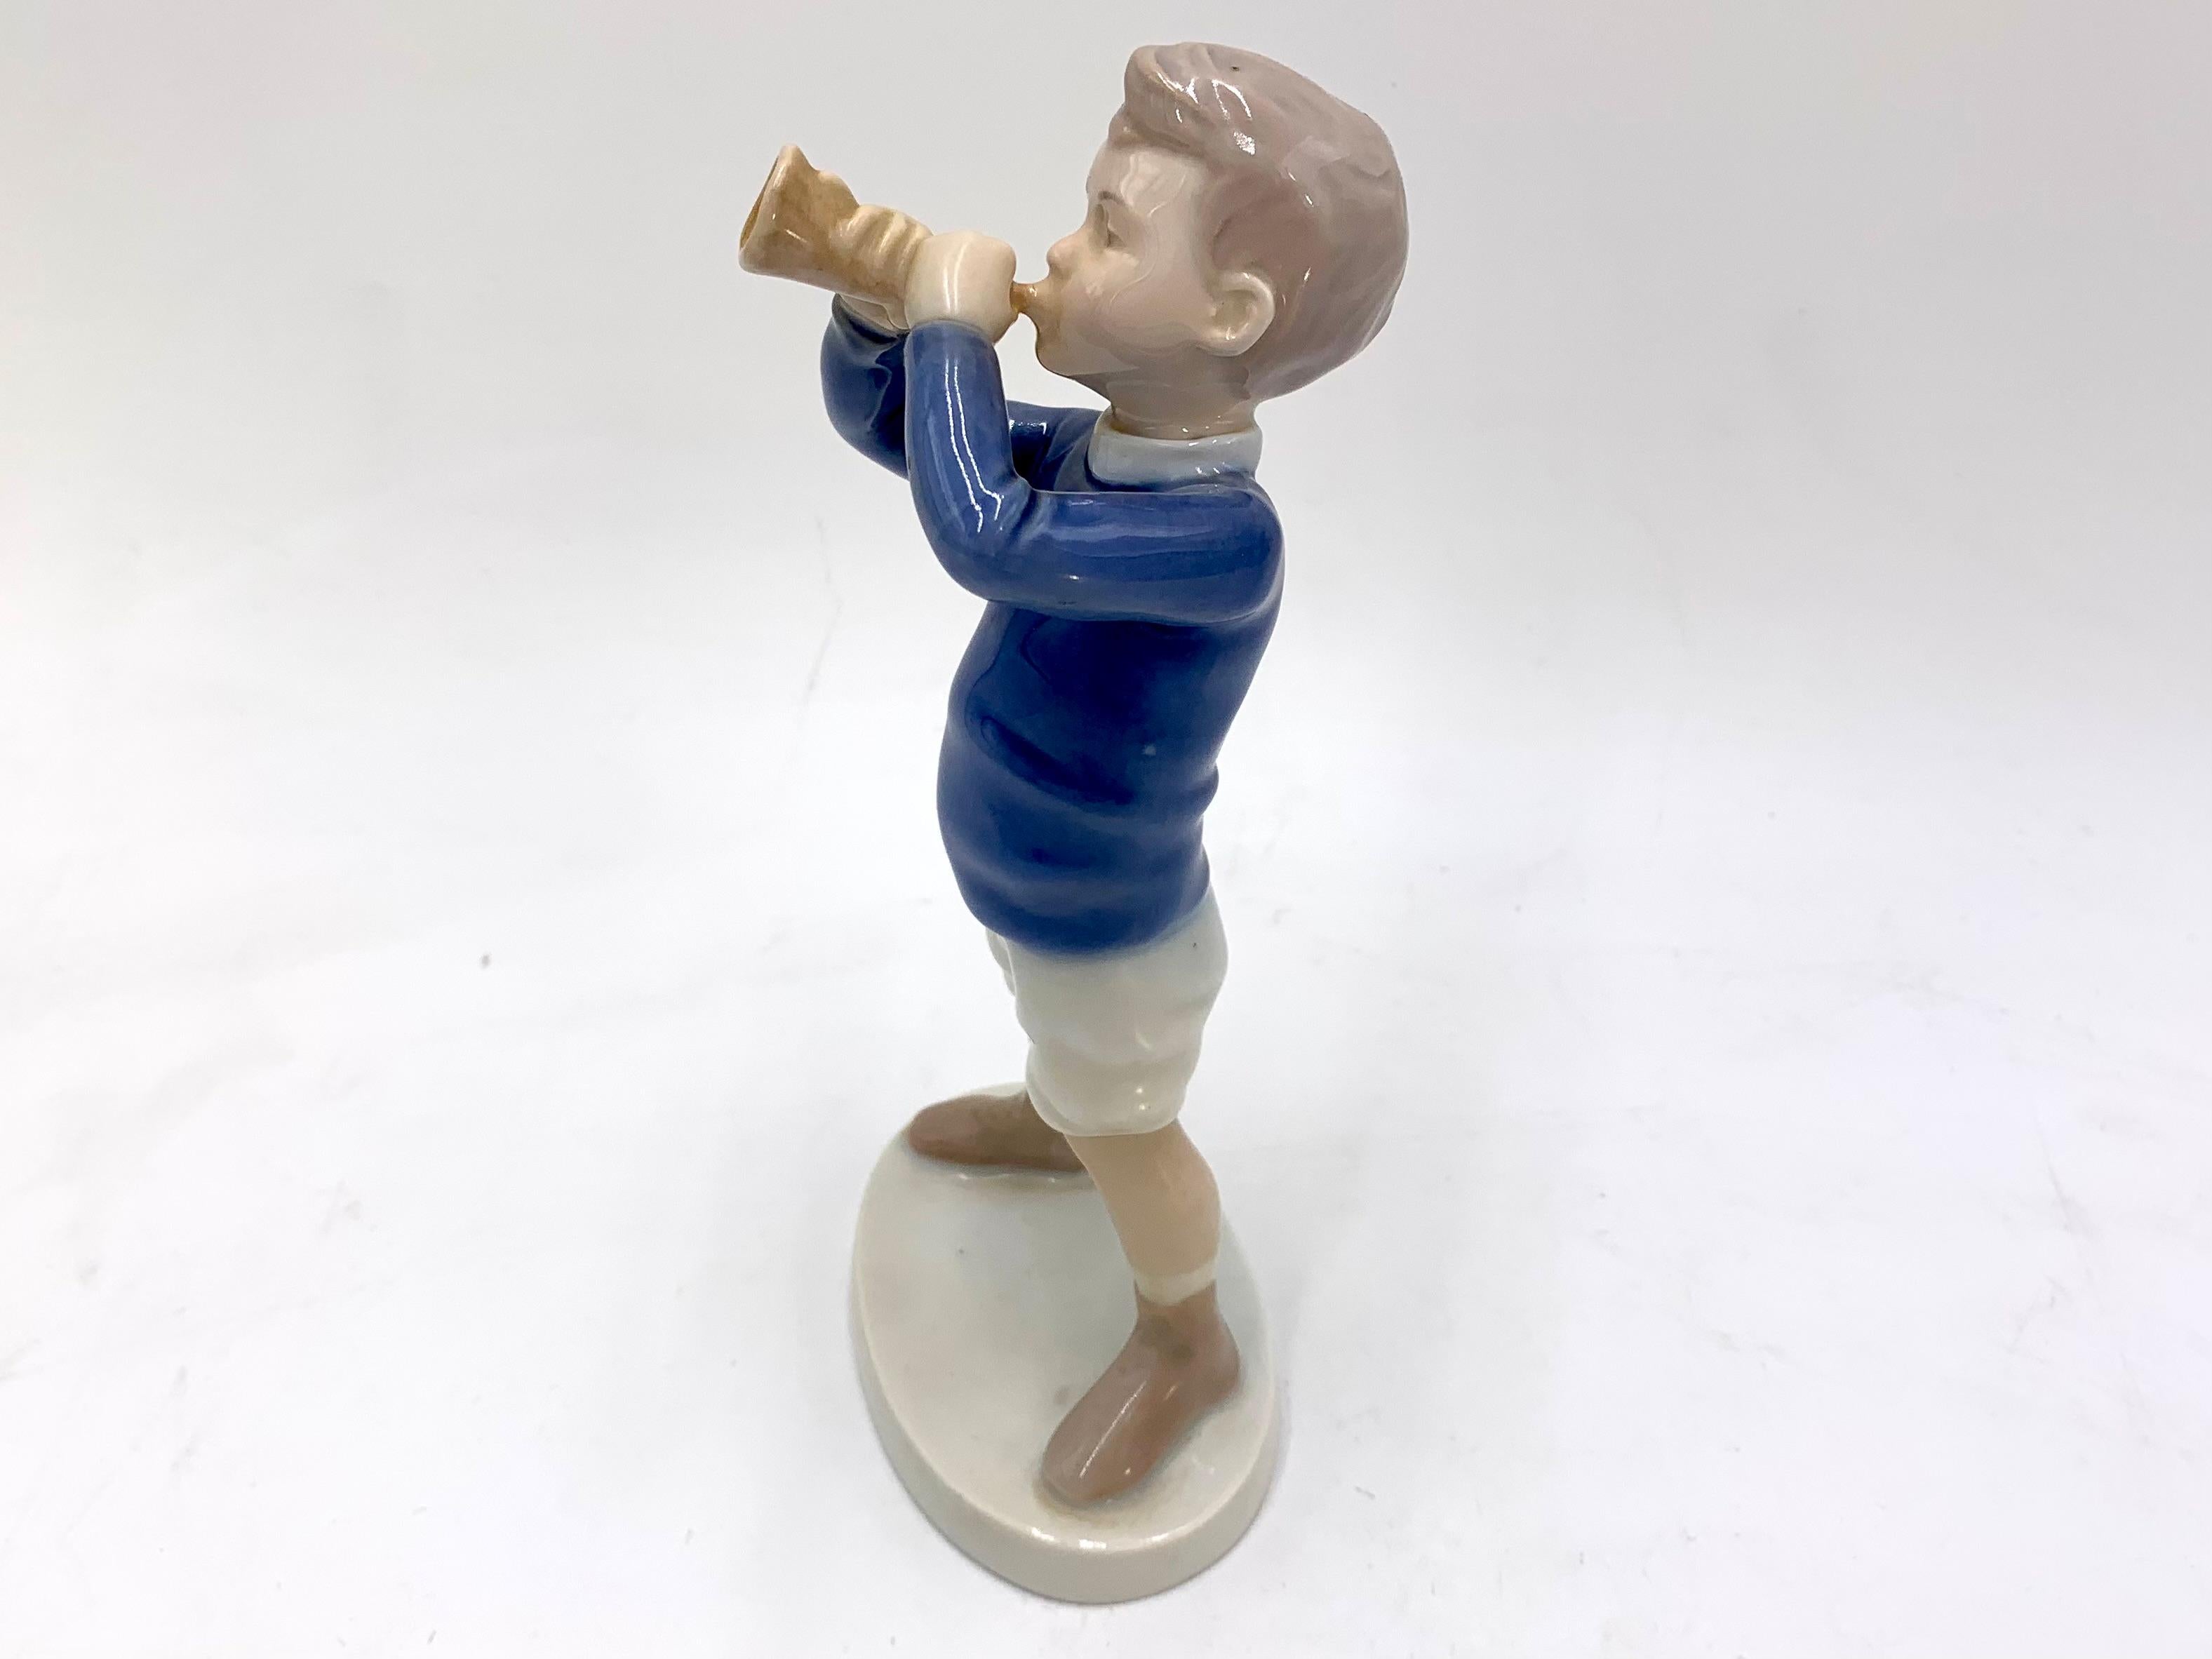 Porcelain figurine of a boy with a trumpet

Made in Denmark by Bing & Grondahl

Produced in the years 1970-1983.

Model number # 1792

Very good condition, no damage

Measures: height 19cm width 8.5cm depth 6cm.